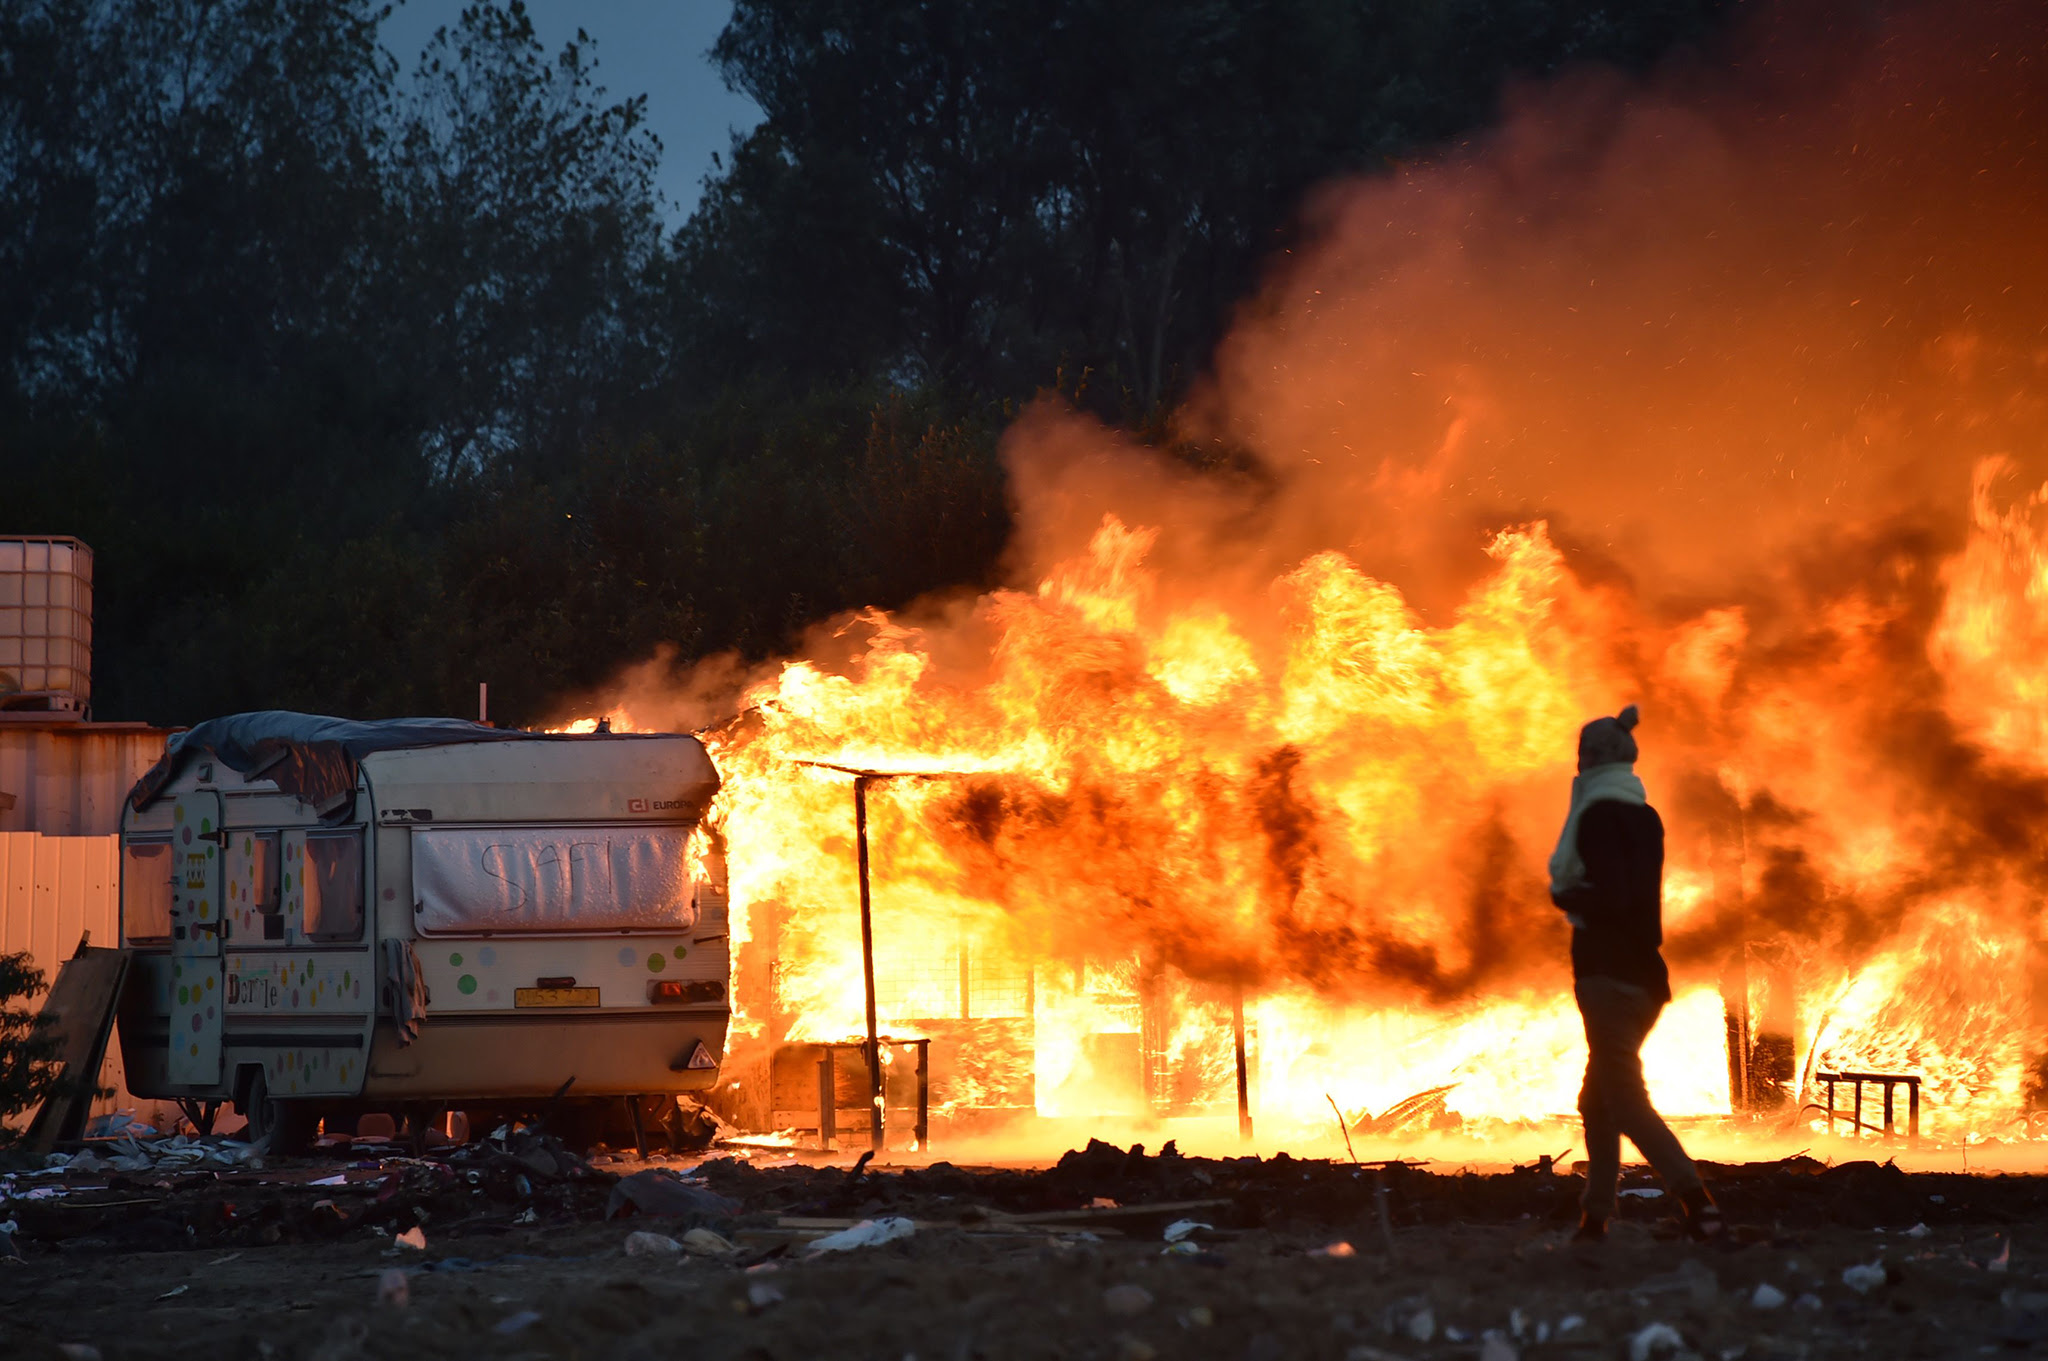 A woman walks past a burning structure at the "Jungle" migrant camp in Calais, northern France, early on October 28, 2016, after a massive operation to clear the settlement where 6,000-8,000 people have been living. Migrants left behind after the demolition of France's notorious "Jungle" faced a day of reckoning on October 28 after spending the night, with official blessing, in a disused part of the camp. / AFP PHOTO / PHILIPPE HUGUENPHILIPPE HUGUEN/AFP/Getty Images